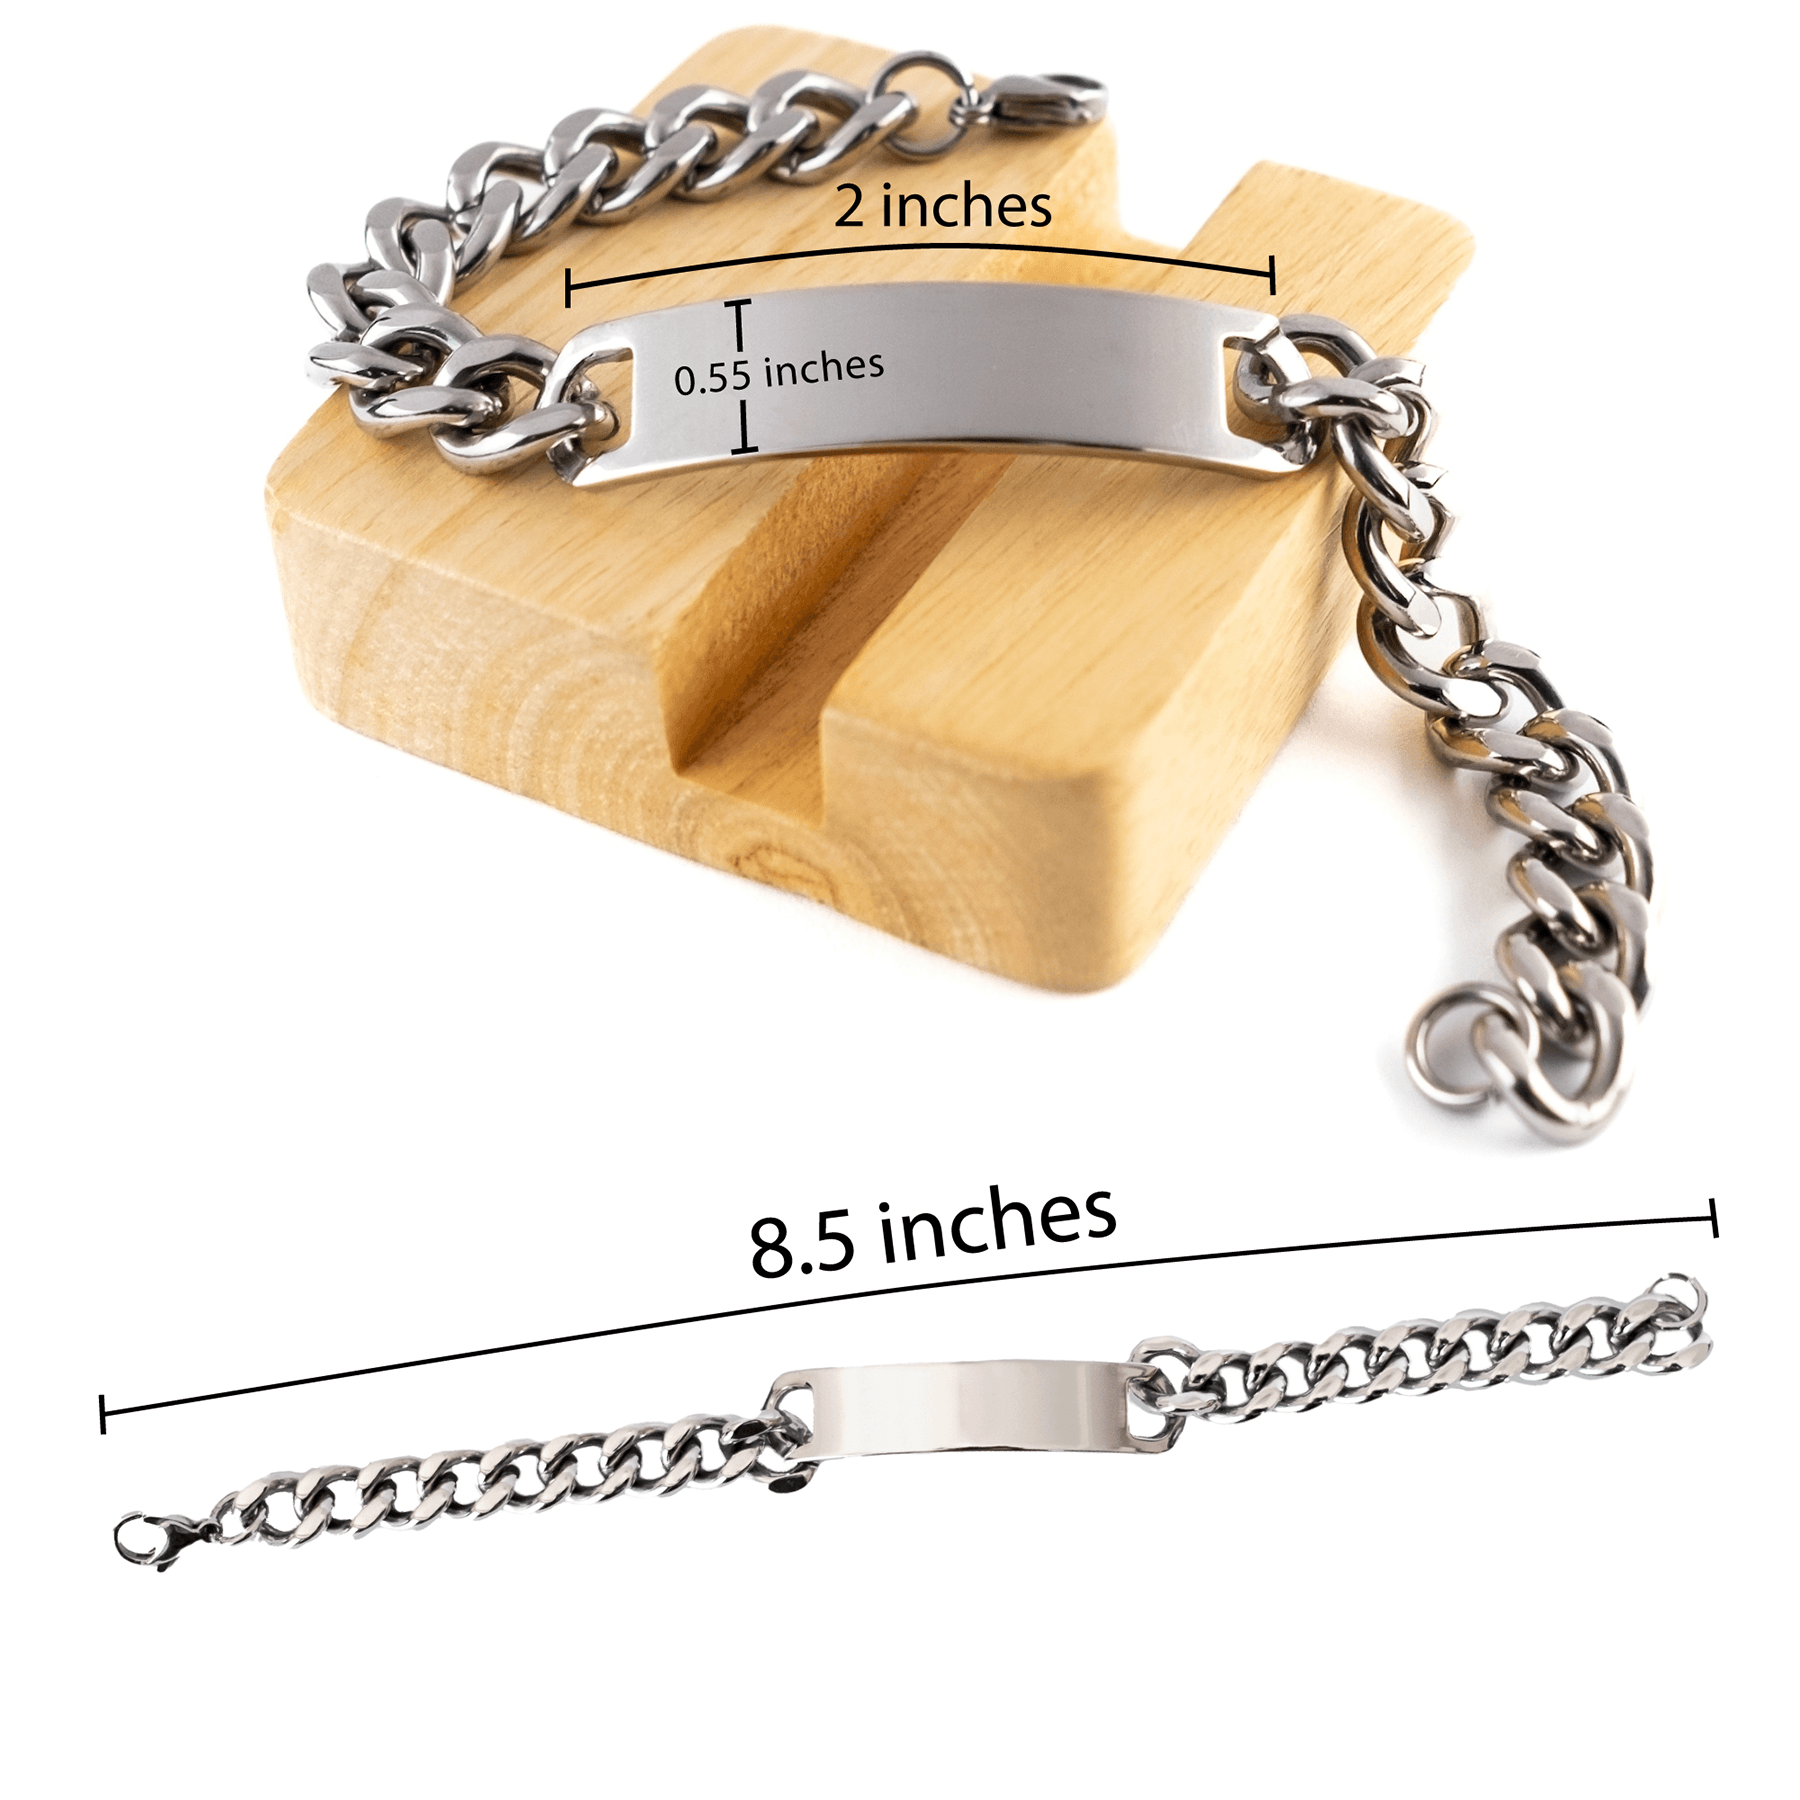 Sarcastic Machinist Cuban Chain Stainless Steel Bracelet Gifts, Christmas Holiday Gifts for Machinist Birthday, Machinist: Because greatness is woven into the fabric of every day, Coworkers, Friends - Mallard Moon Gift Shop